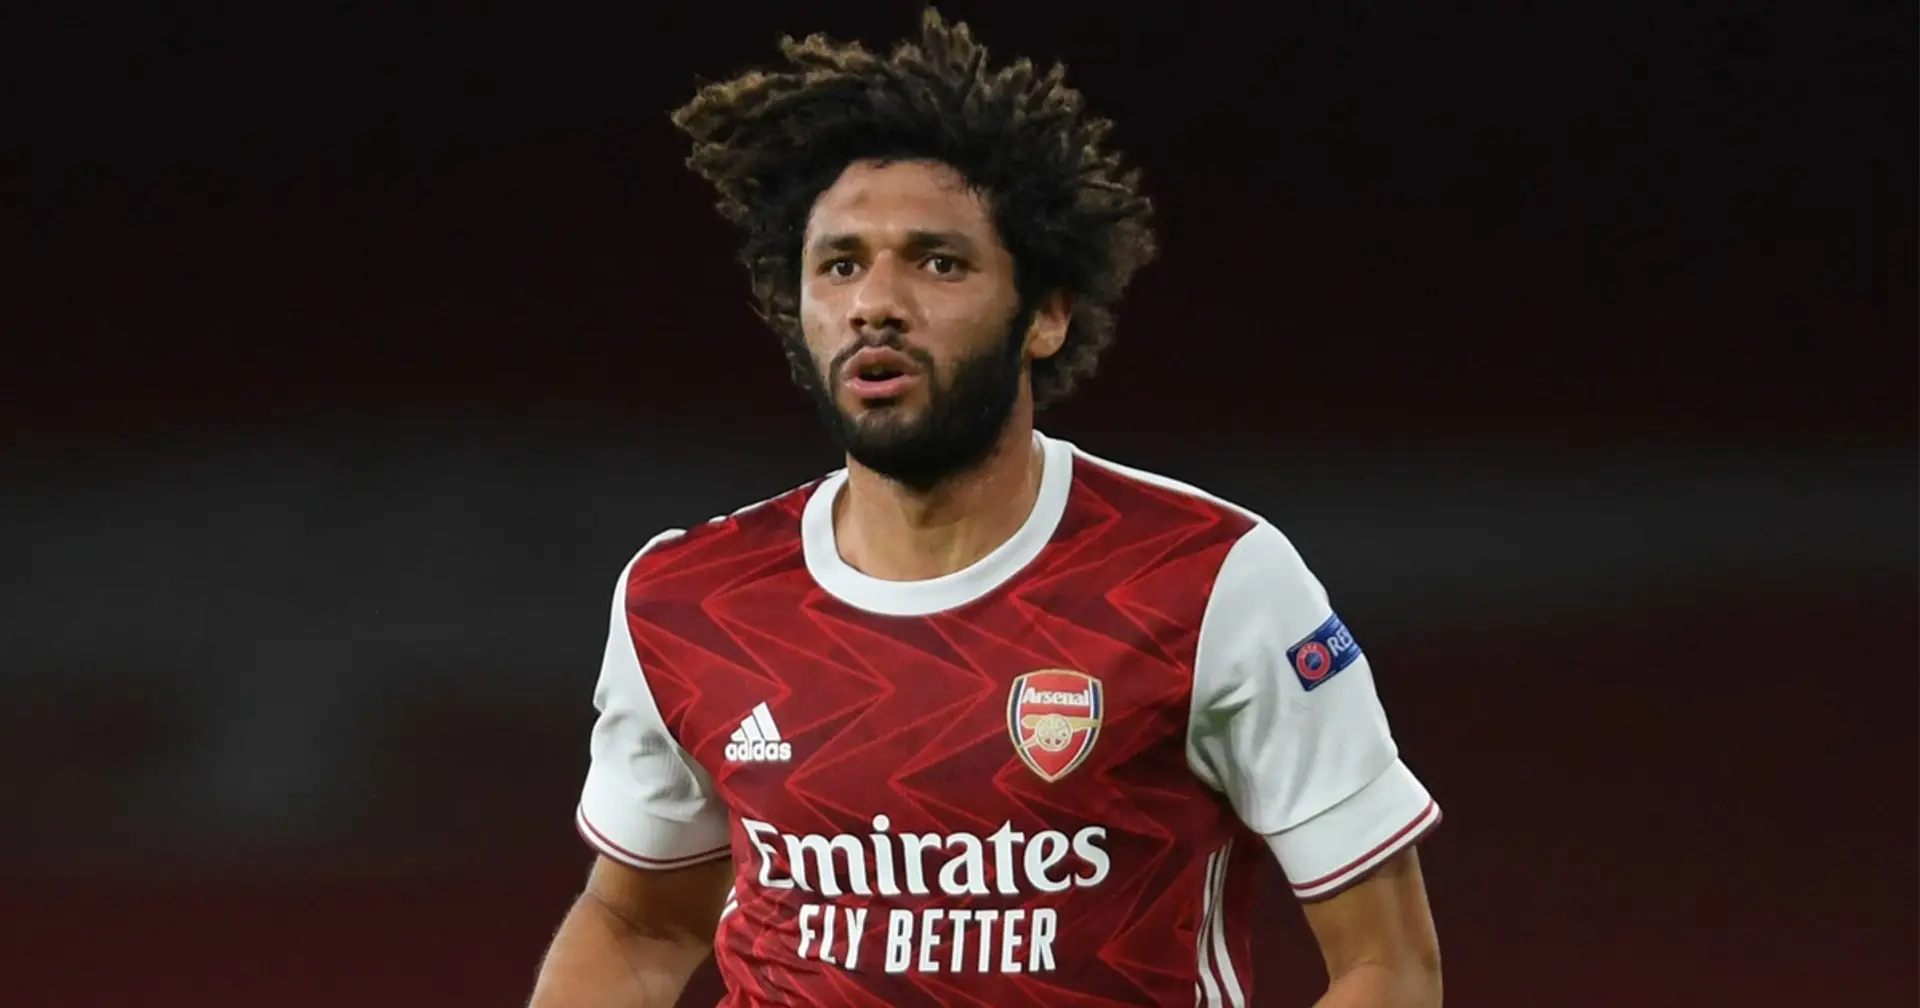 Pyramid Pirlo: Elneny has highest passing accuracy in Premier League